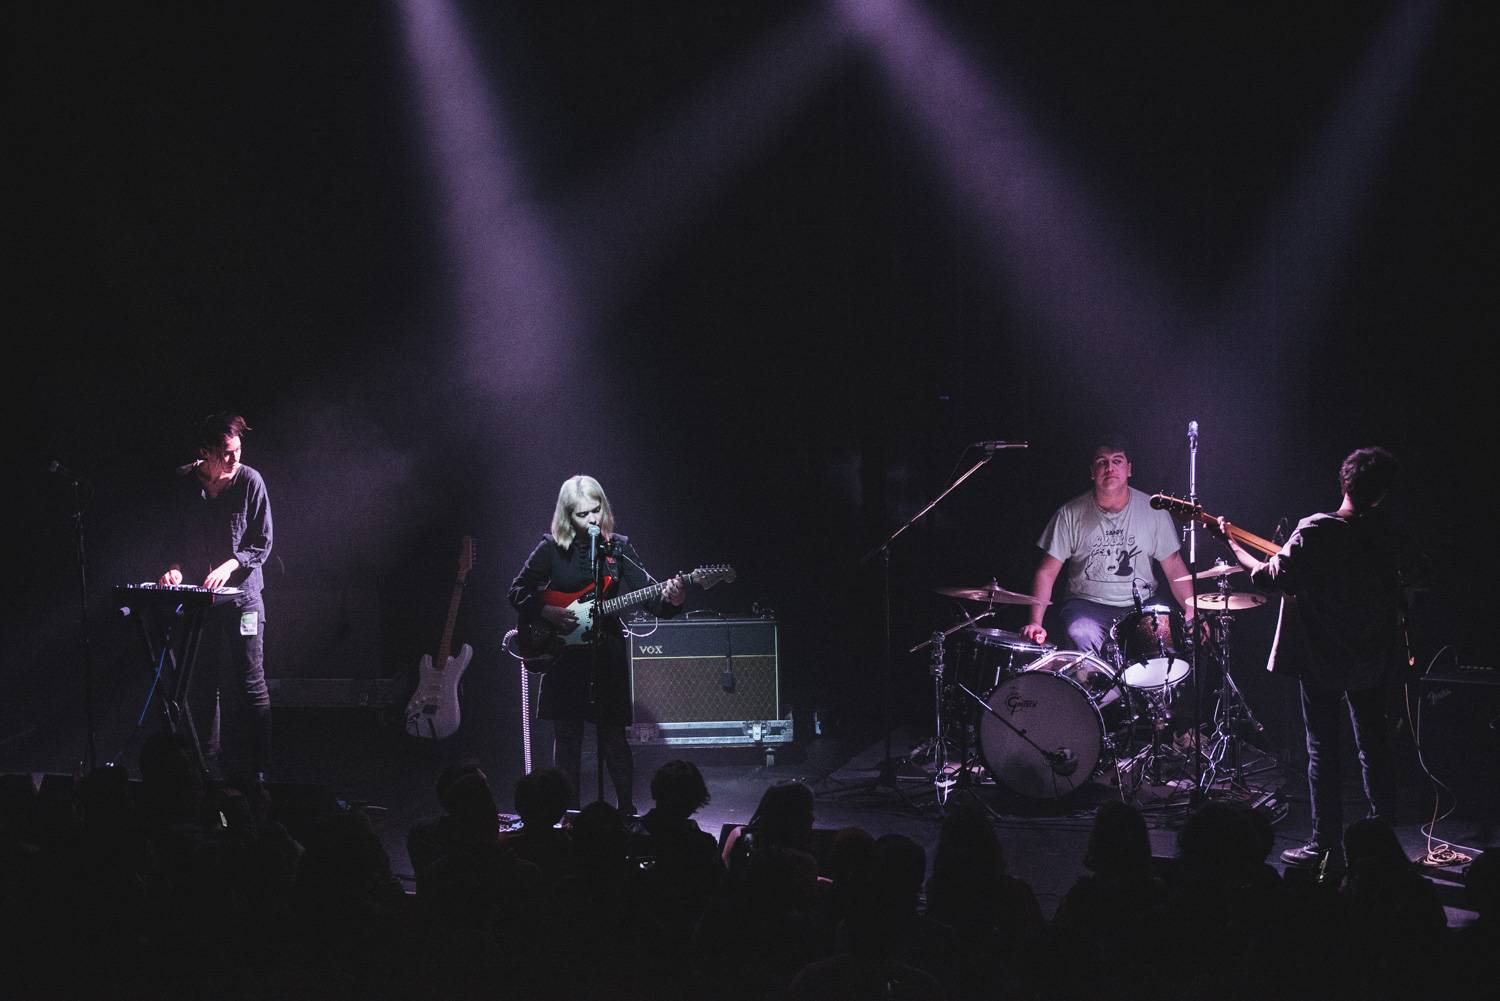 Snail Mail at the Imperial, Vancouver, Jan 27 2019. Pavel Boiko photo.